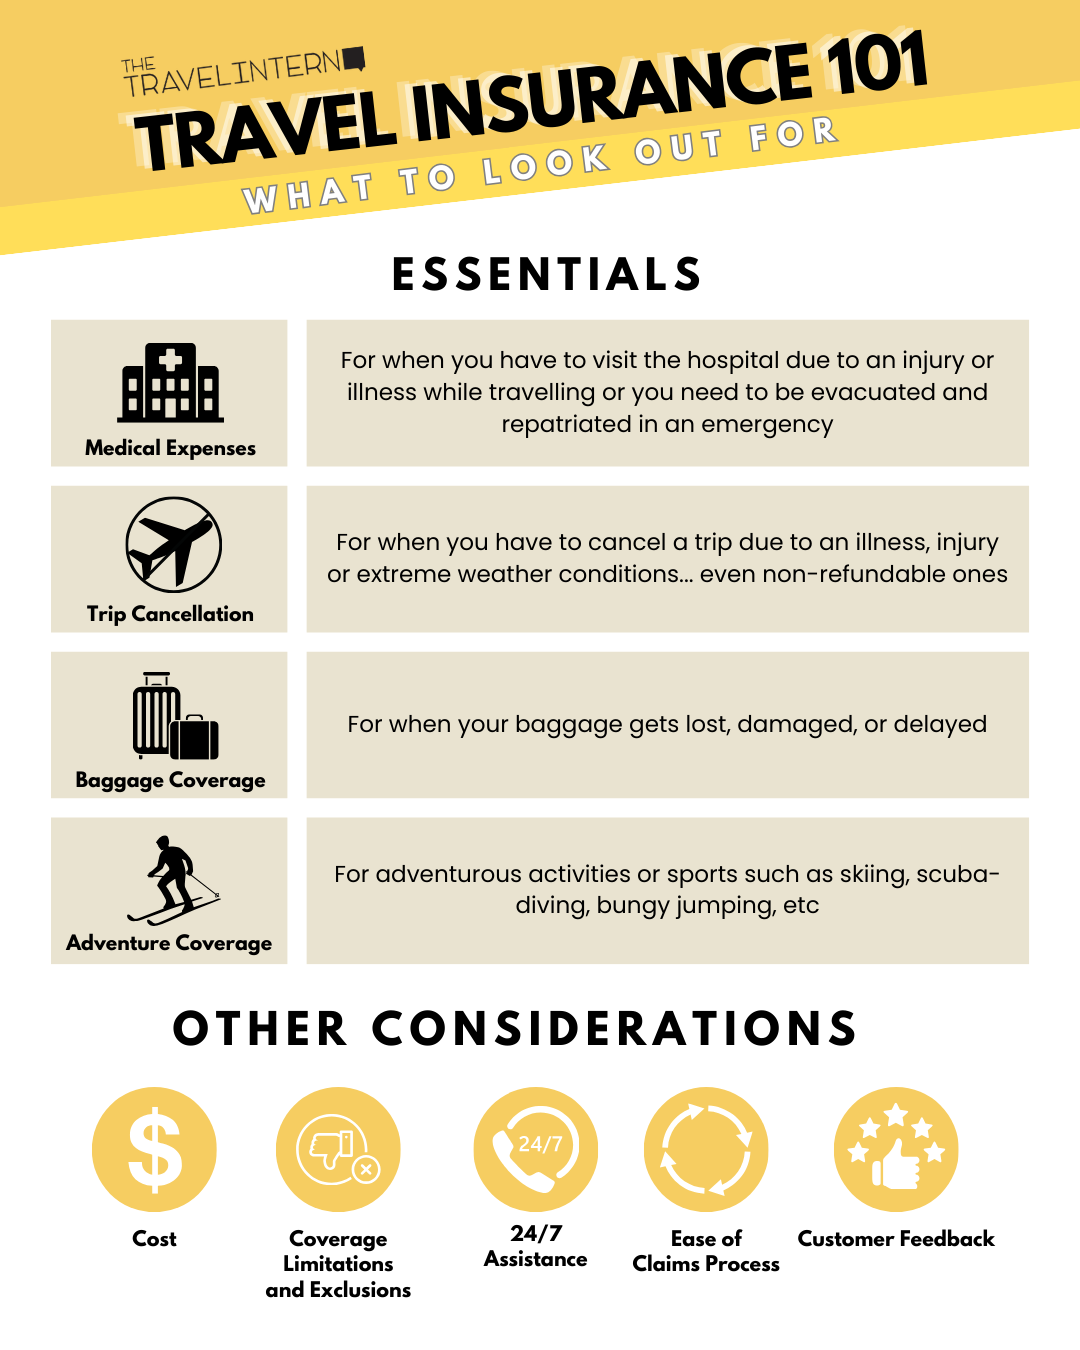 What to Consider in Buying Travel Insurance - Basics